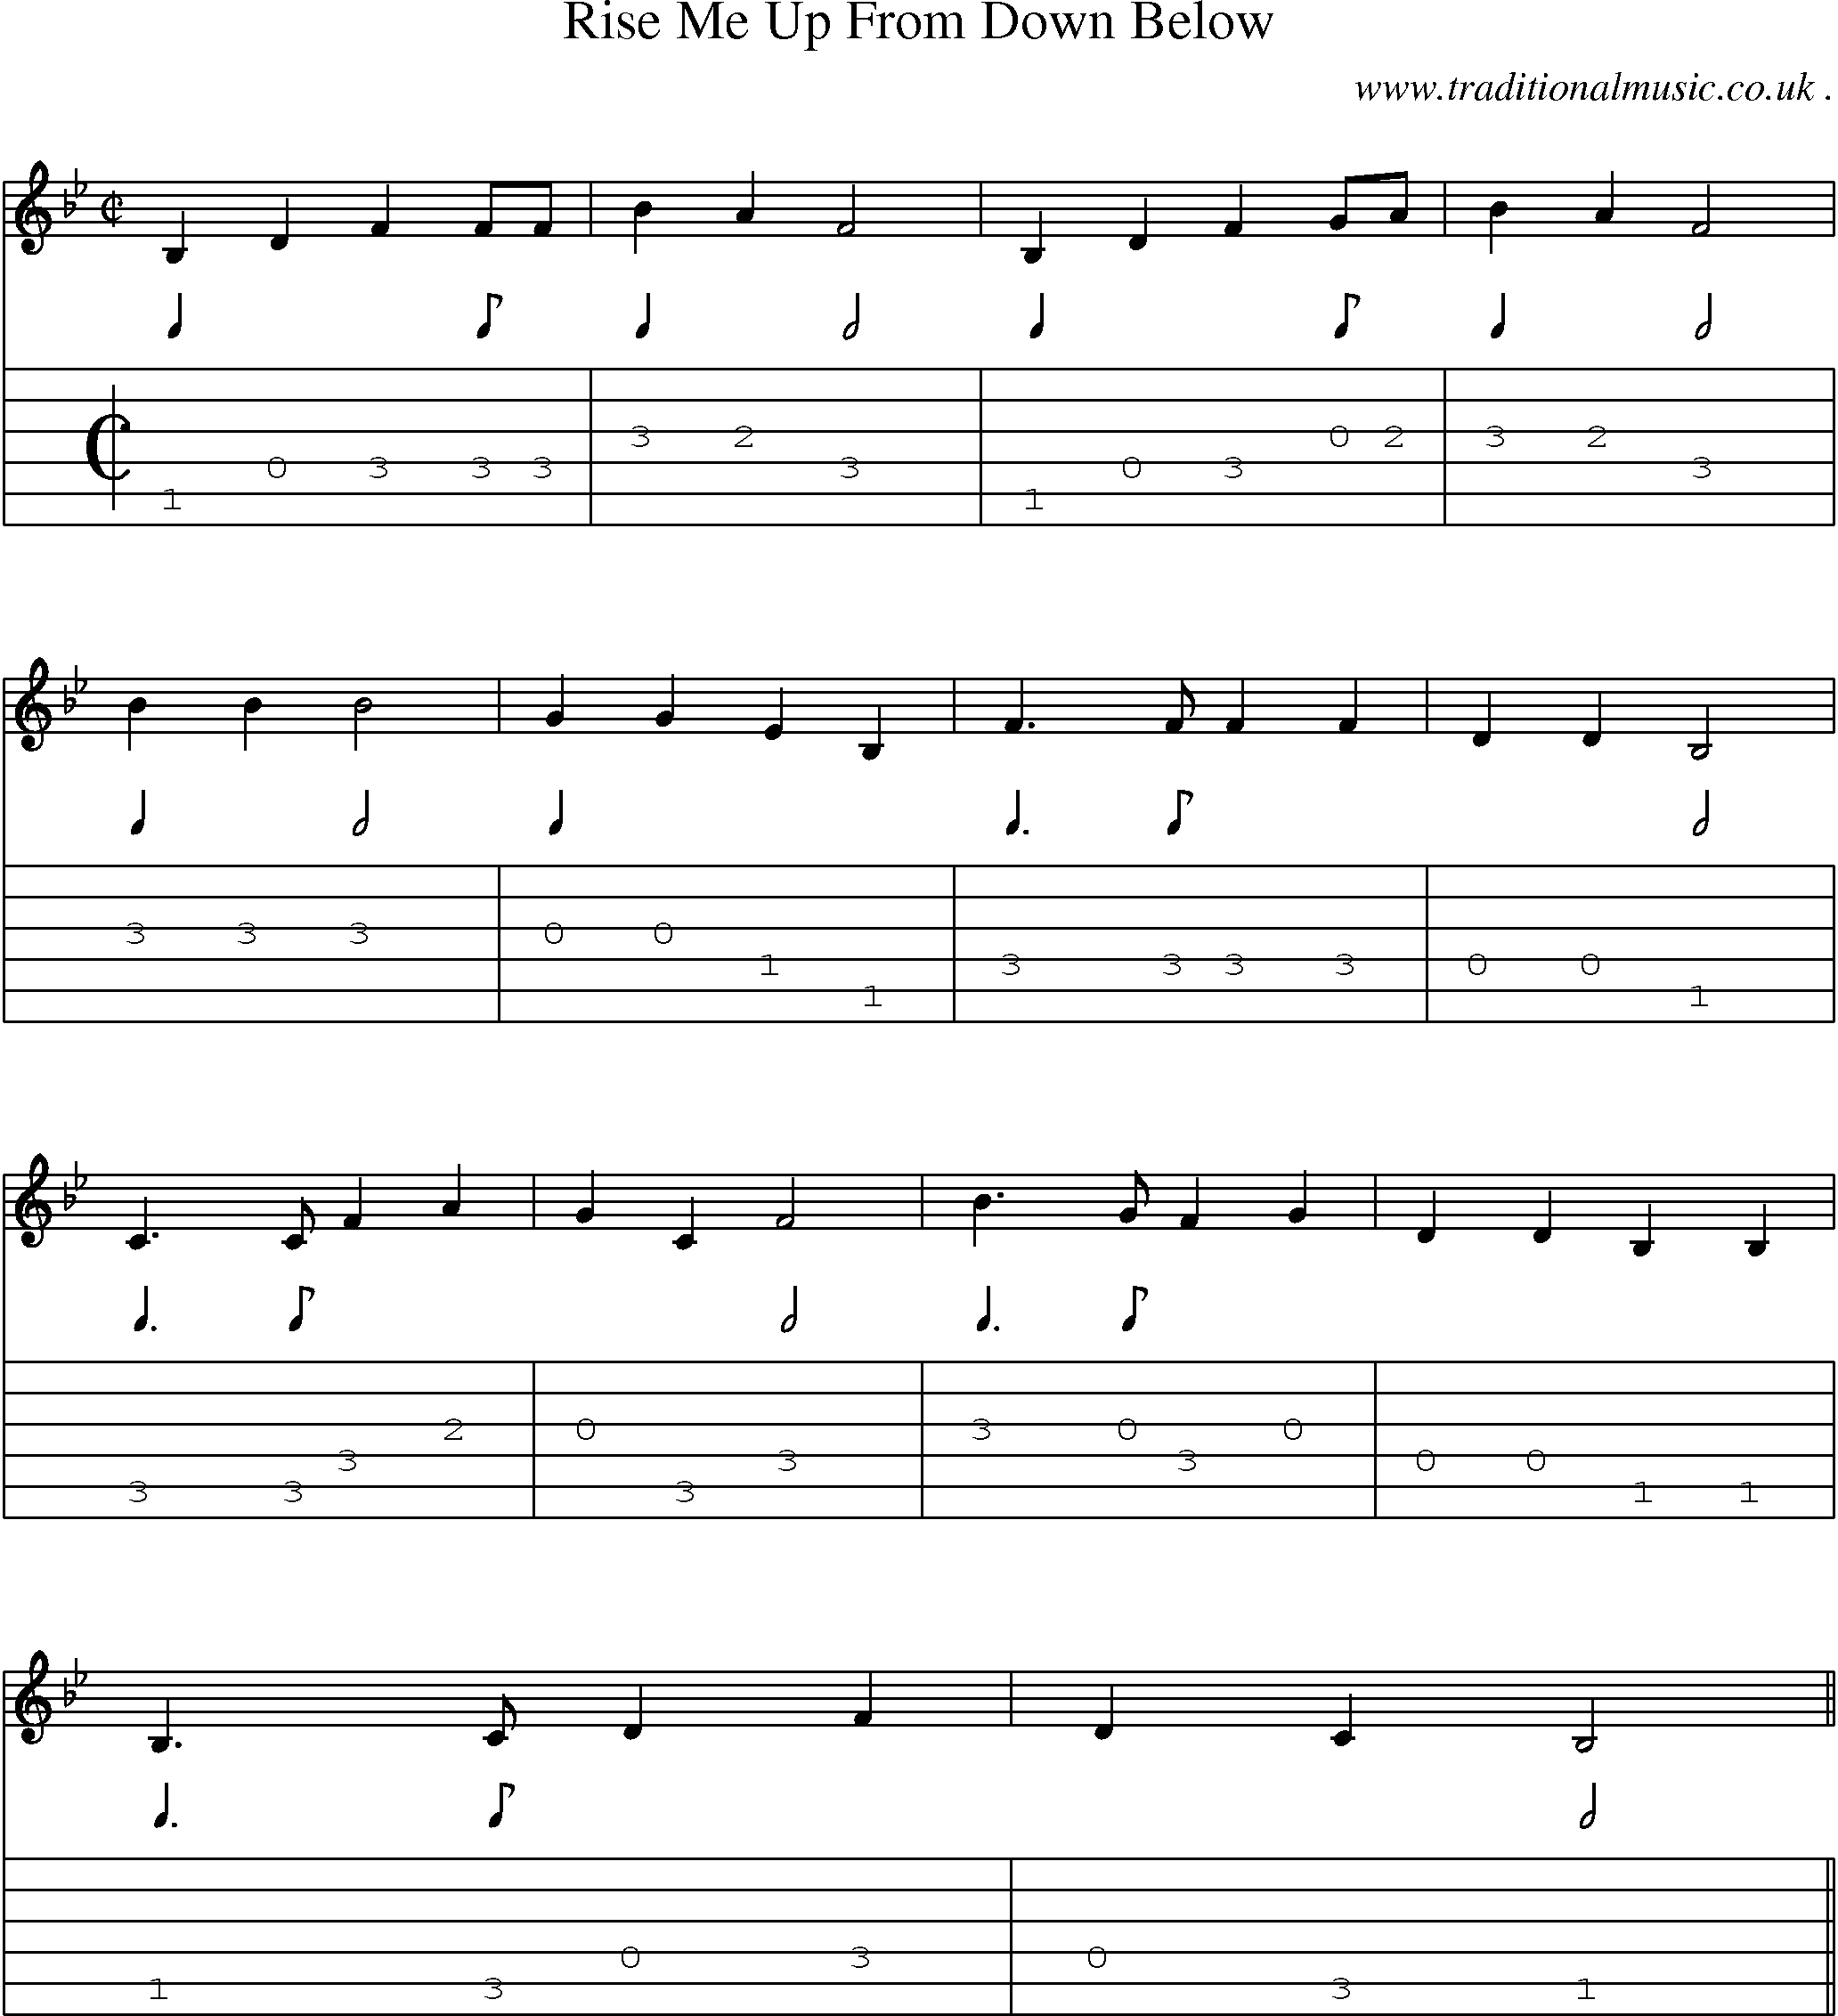 Sheet-Music and Guitar Tabs for Rise Me Up From Down Below